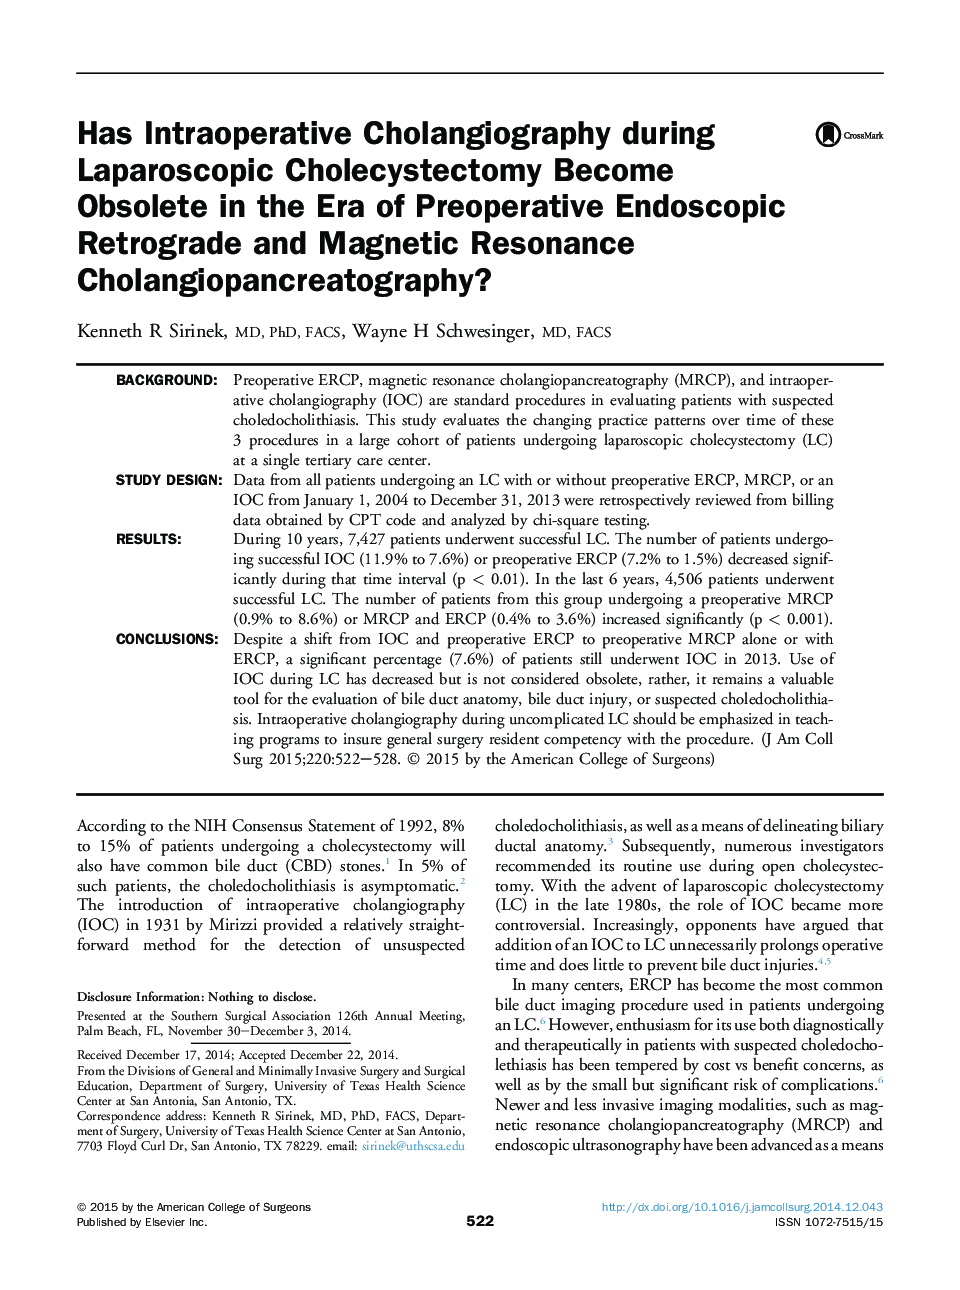 Has Intraoperative Cholangiography during Laparoscopic Cholecystectomy Become Obsolete in the Era of Preoperative Endoscopic Retrograde and Magnetic Resonance Cholangiopancreatography? 